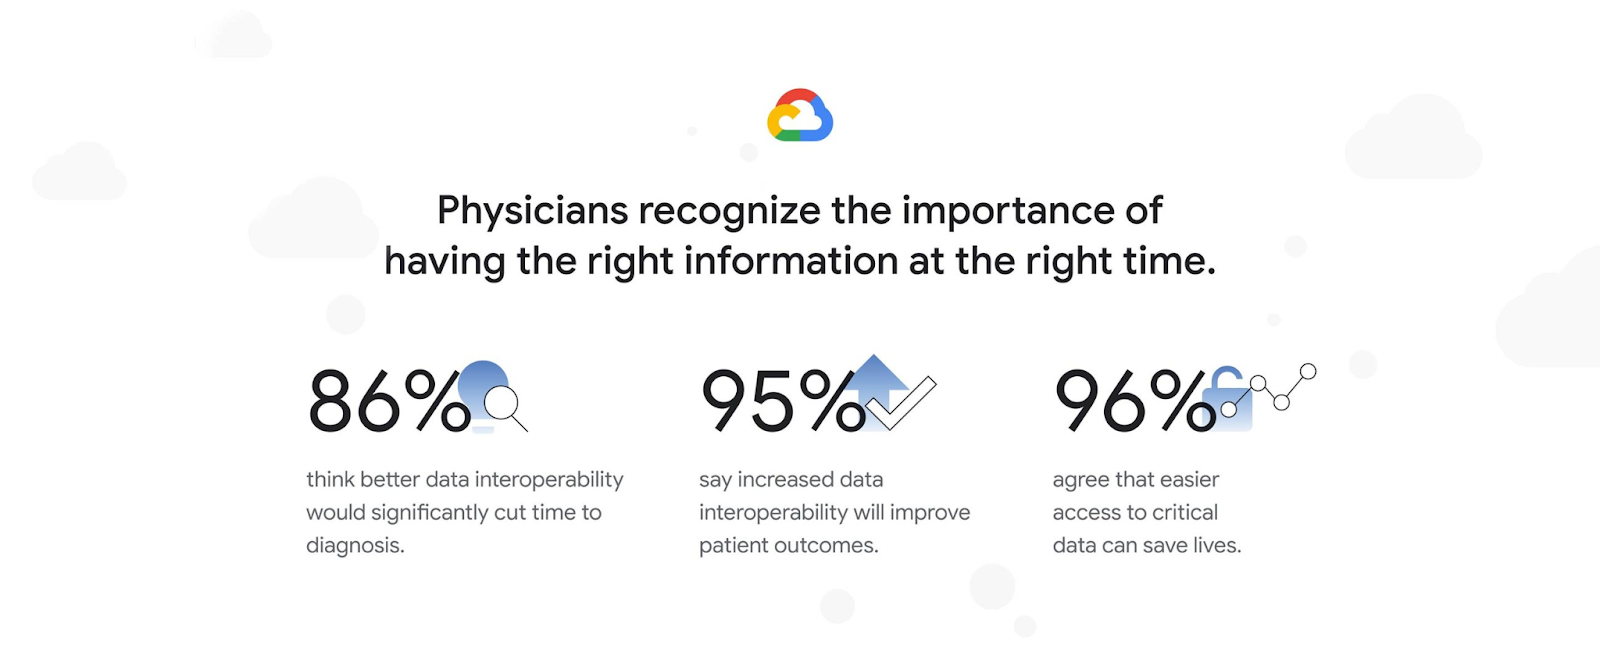 Graphic showing the importance of data-driven healthcare: The image presents three key statistics reflecting physicians' opinions on data interoperability in healthcare. At the top, a statement reads, 'Physicians recognize the importance of having the right information at the right time.' Below, the first statistic is '86%' represented by a magnifying glass icon, indicating that this percentage of physicians think better data interoperability would significantly cut time to diagnosis. The second statistic, '95%' with an upwards trend arrow icon, suggests that an increased number of physicians say data interoperability will improve patient outcomes. The final statistic, '96%' accompanied by a linked data points icon, shows a consensus among physicians that easier access to critical data can save lives. The Google Cloud logo is present, indicating a probable source or sponsor of the information.